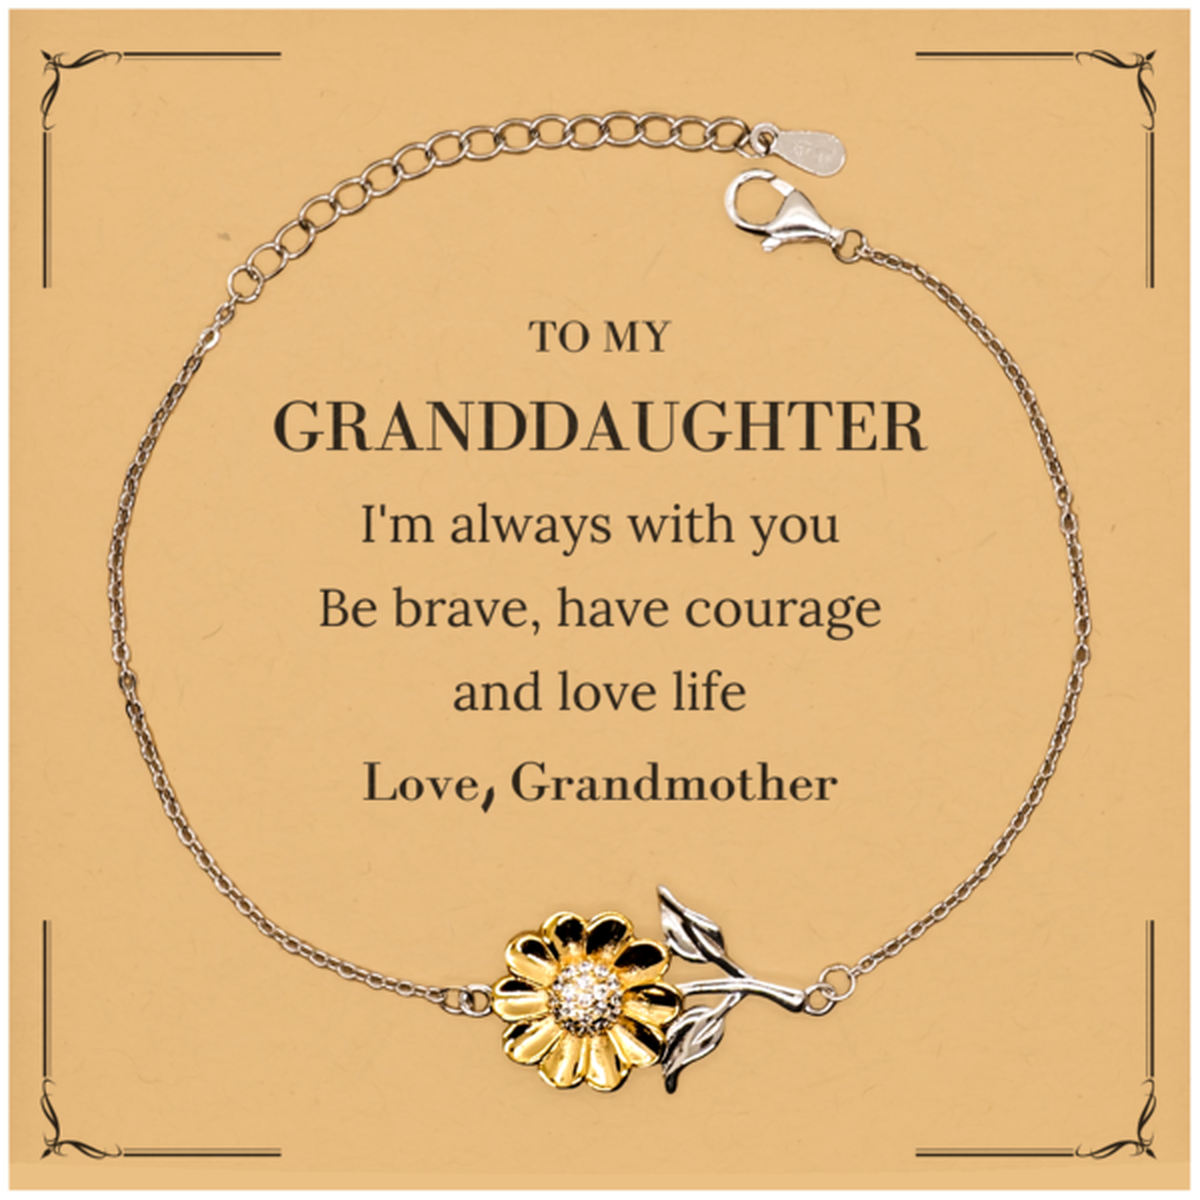 To My Granddaughter Gifts from Grandmother, Unique Sunflower Bracelet Inspirational Christmas Birthday Graduation Gifts for Granddaughter I'm always with you. Be brave, have courage and love life. Love, Grandmother